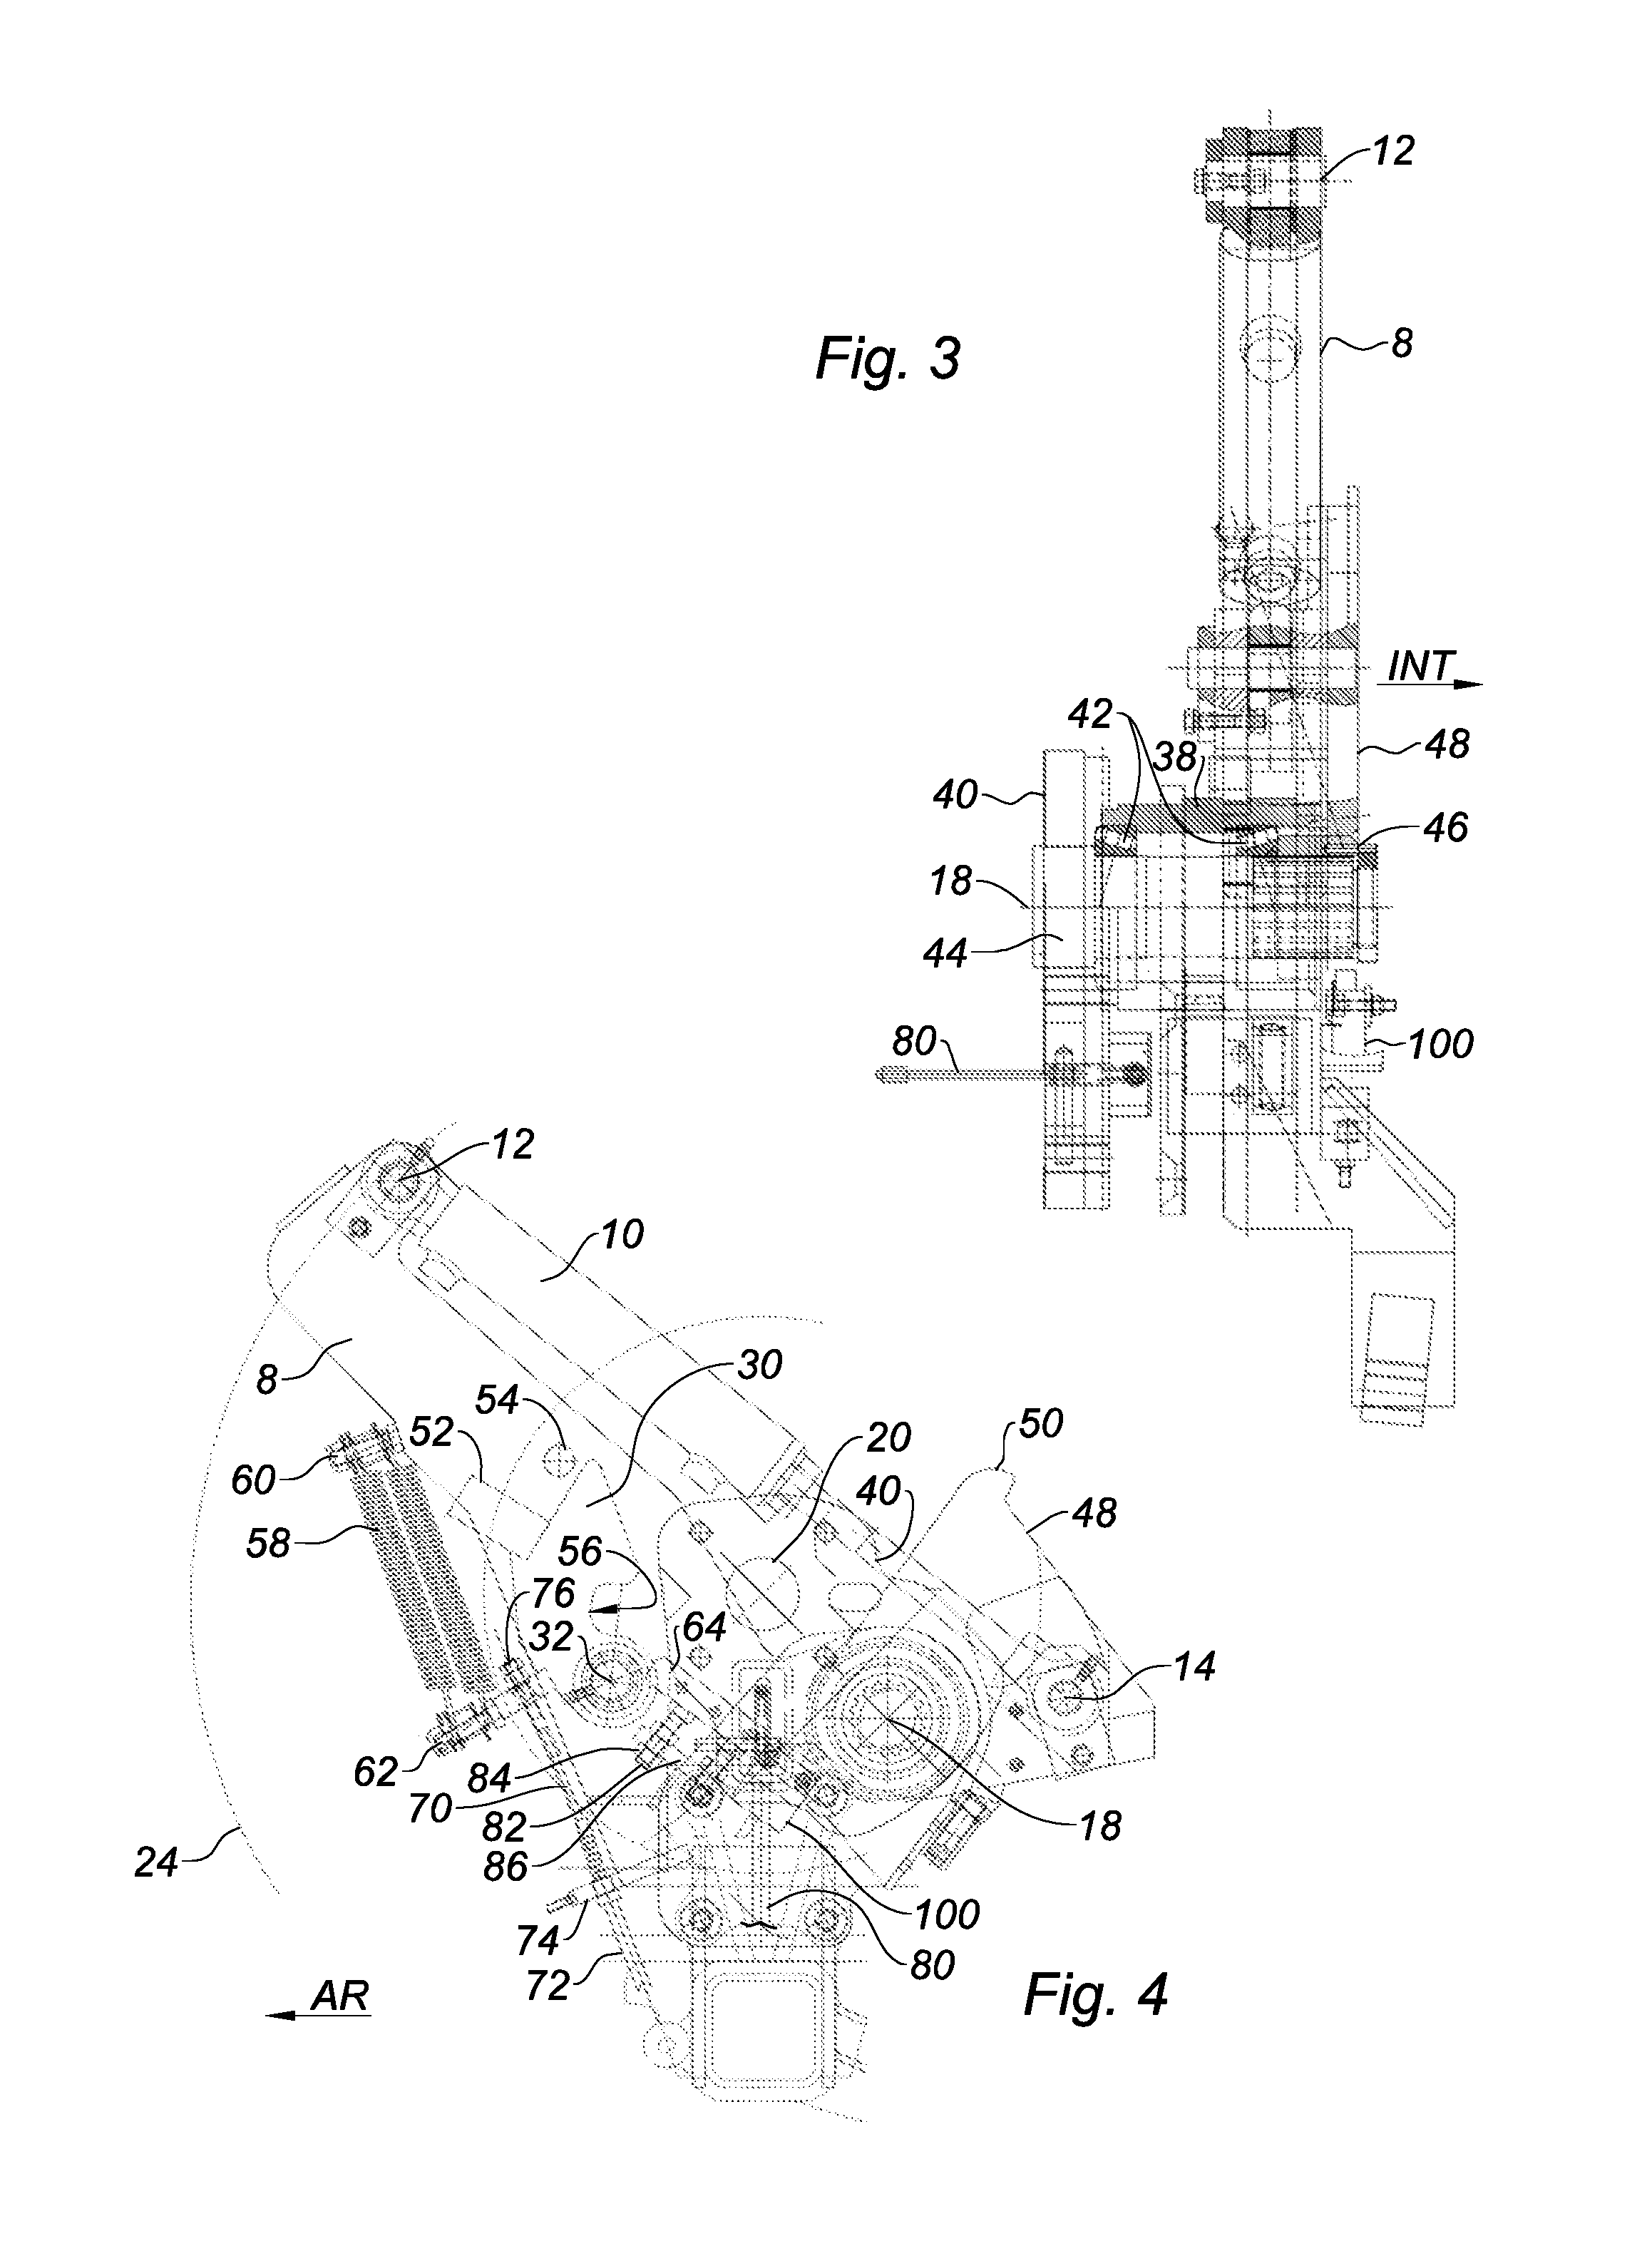 Device for lowering the body of a vehicle including a means for detecting the high position